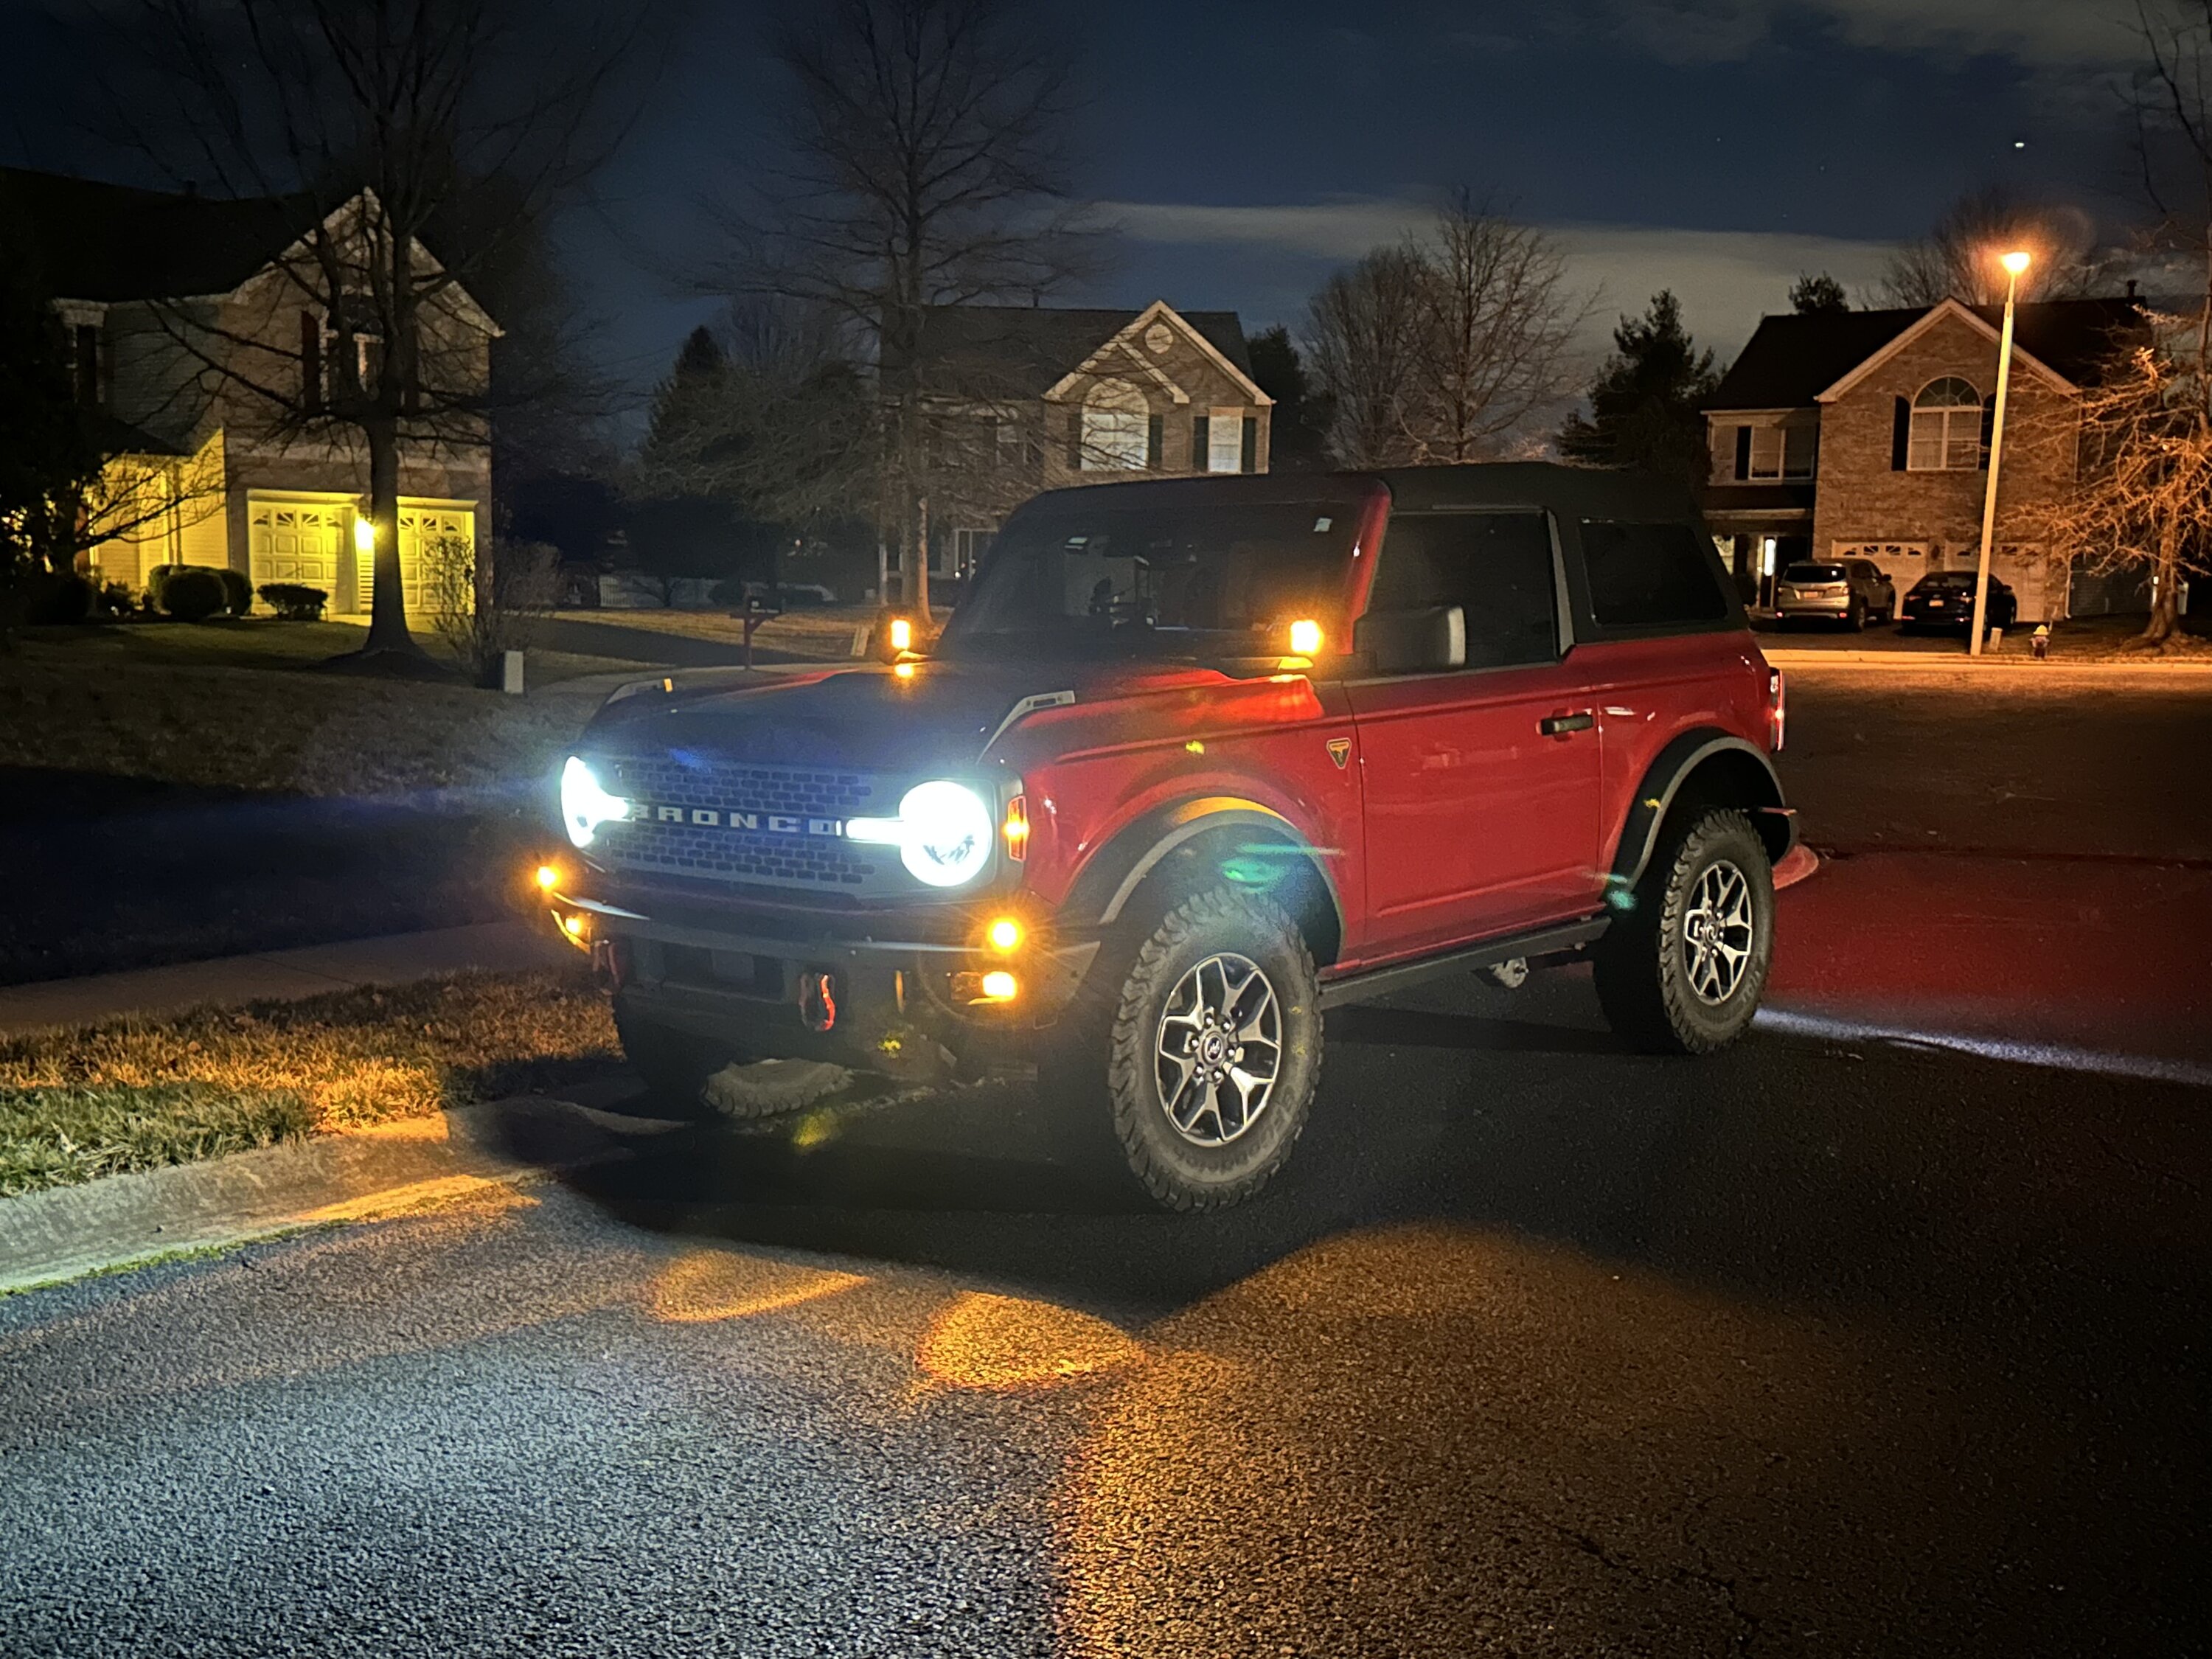 Ford Bronco Trying to find lights - what bumper is this? E99280A3-384E-41B2-9365-EB2ED12B078B